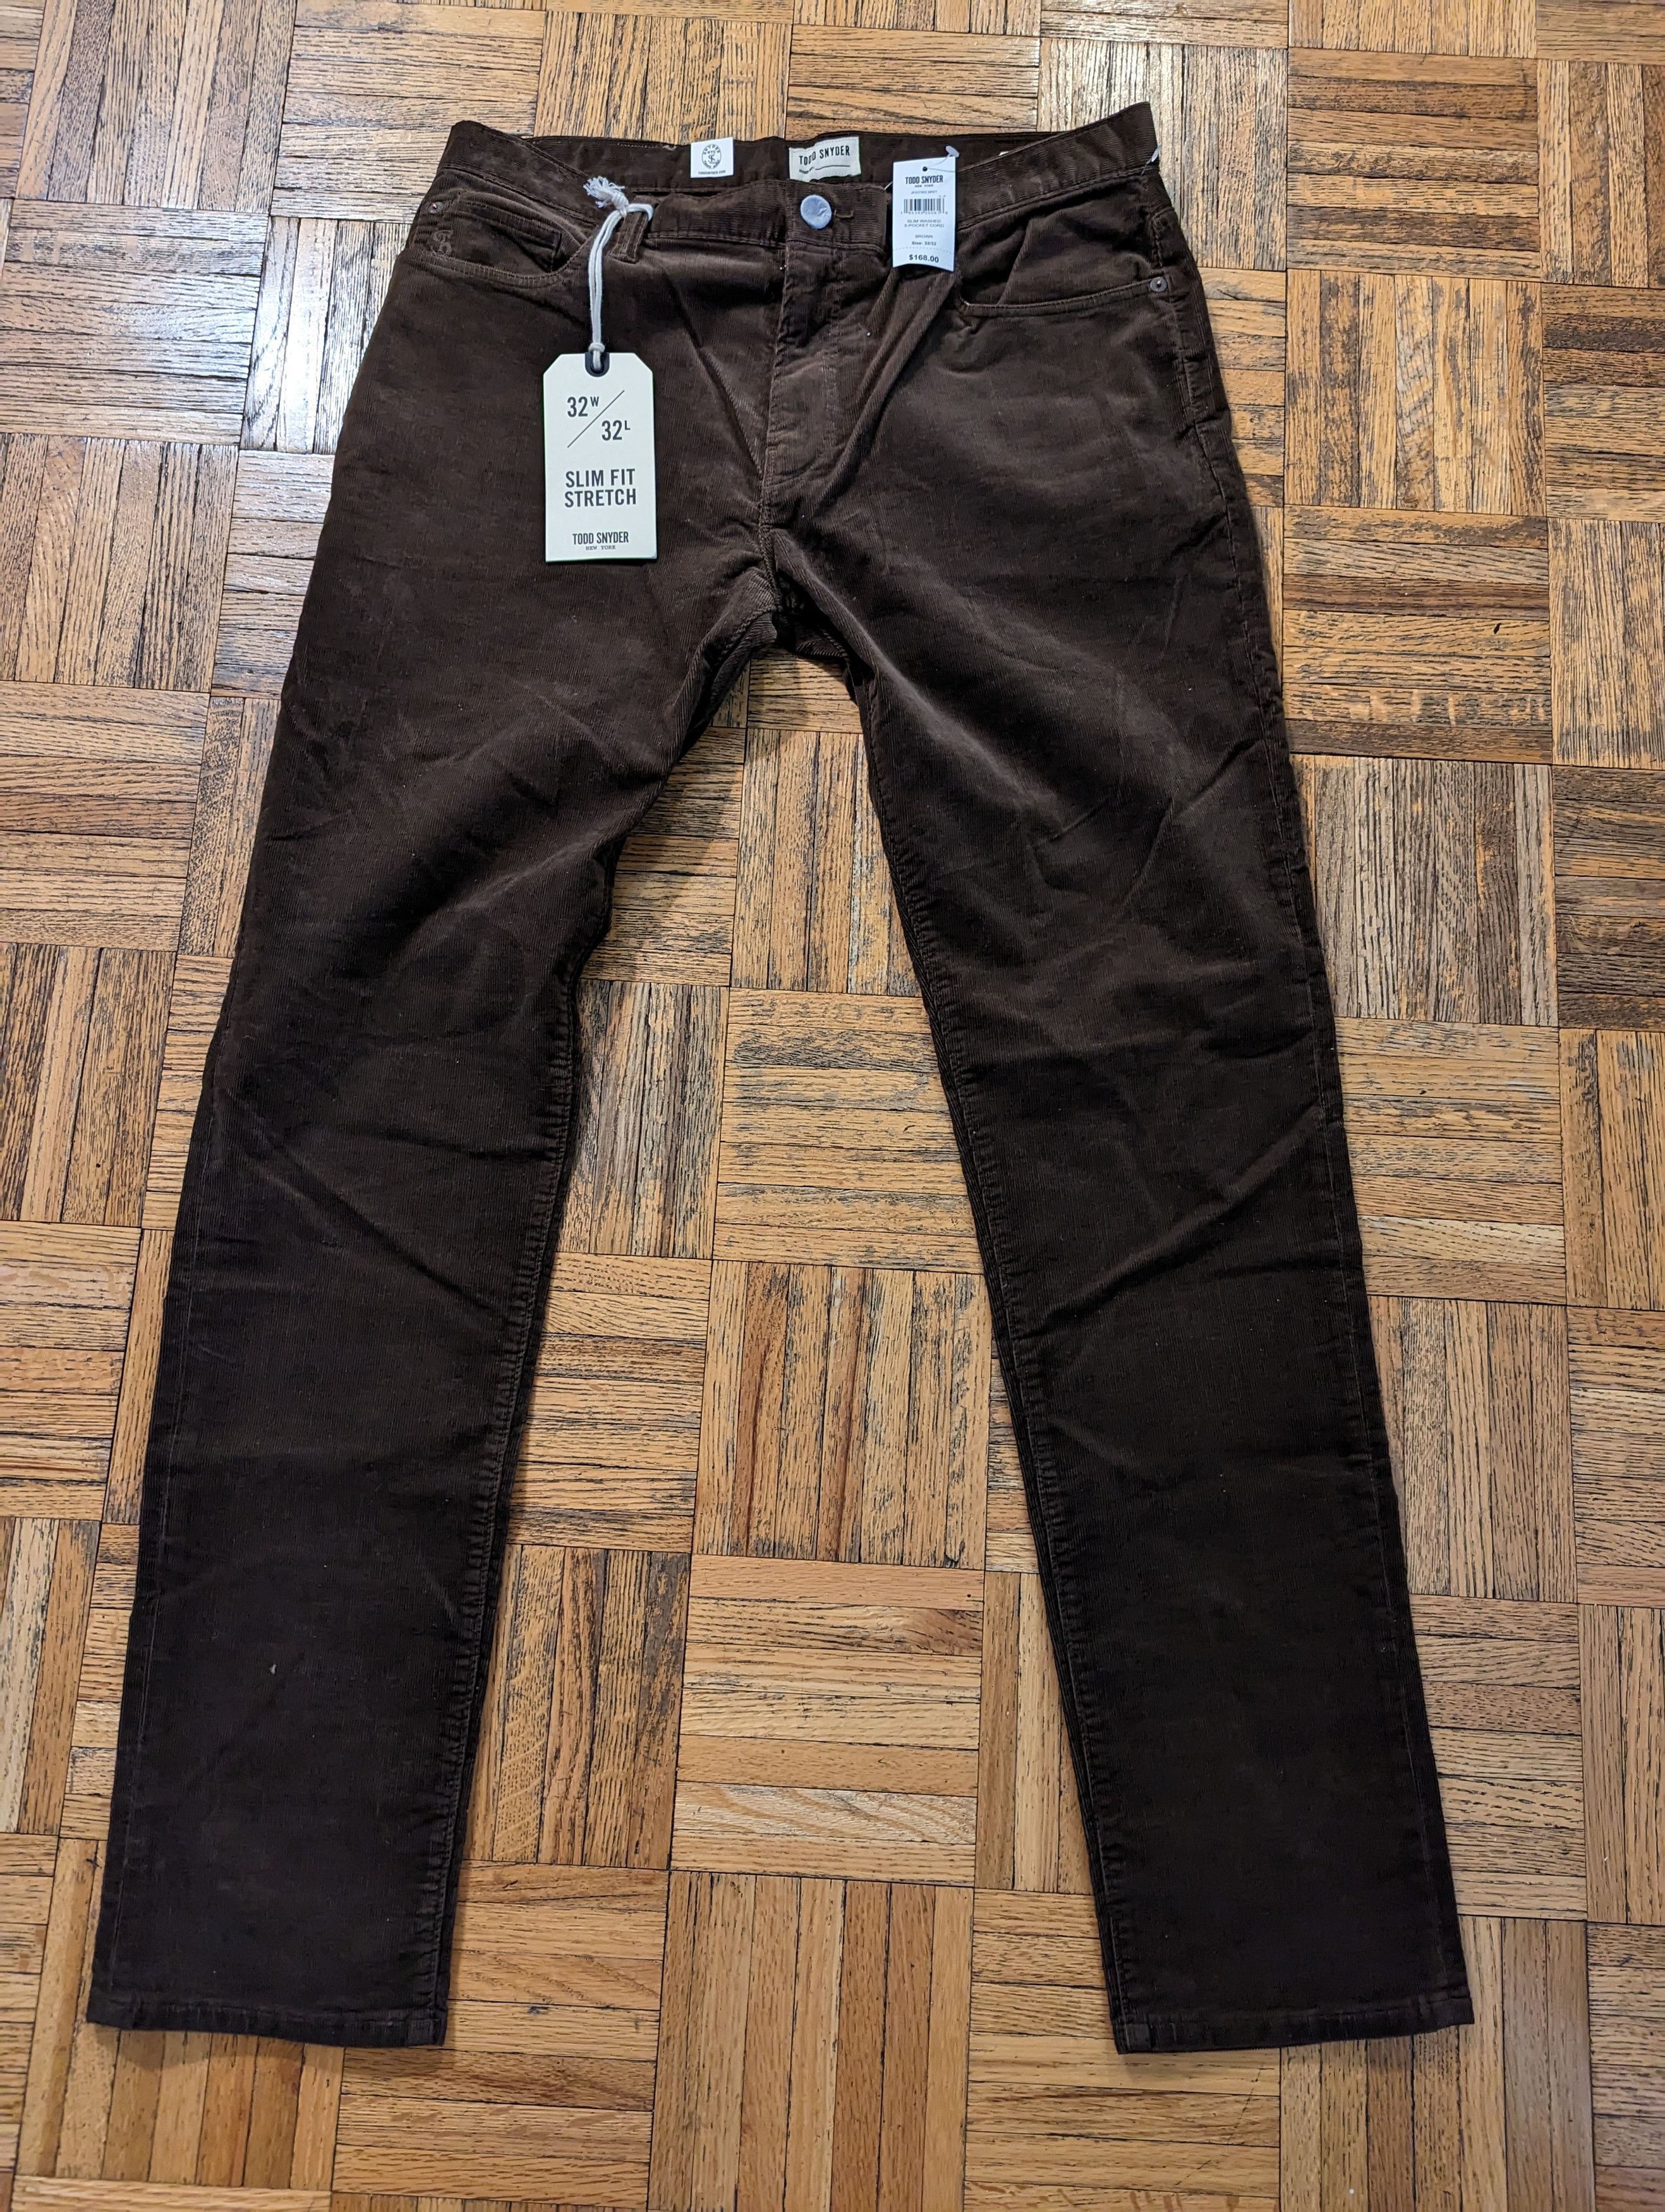 Todd Snyder Corduroy pants, new with tags | Grailed